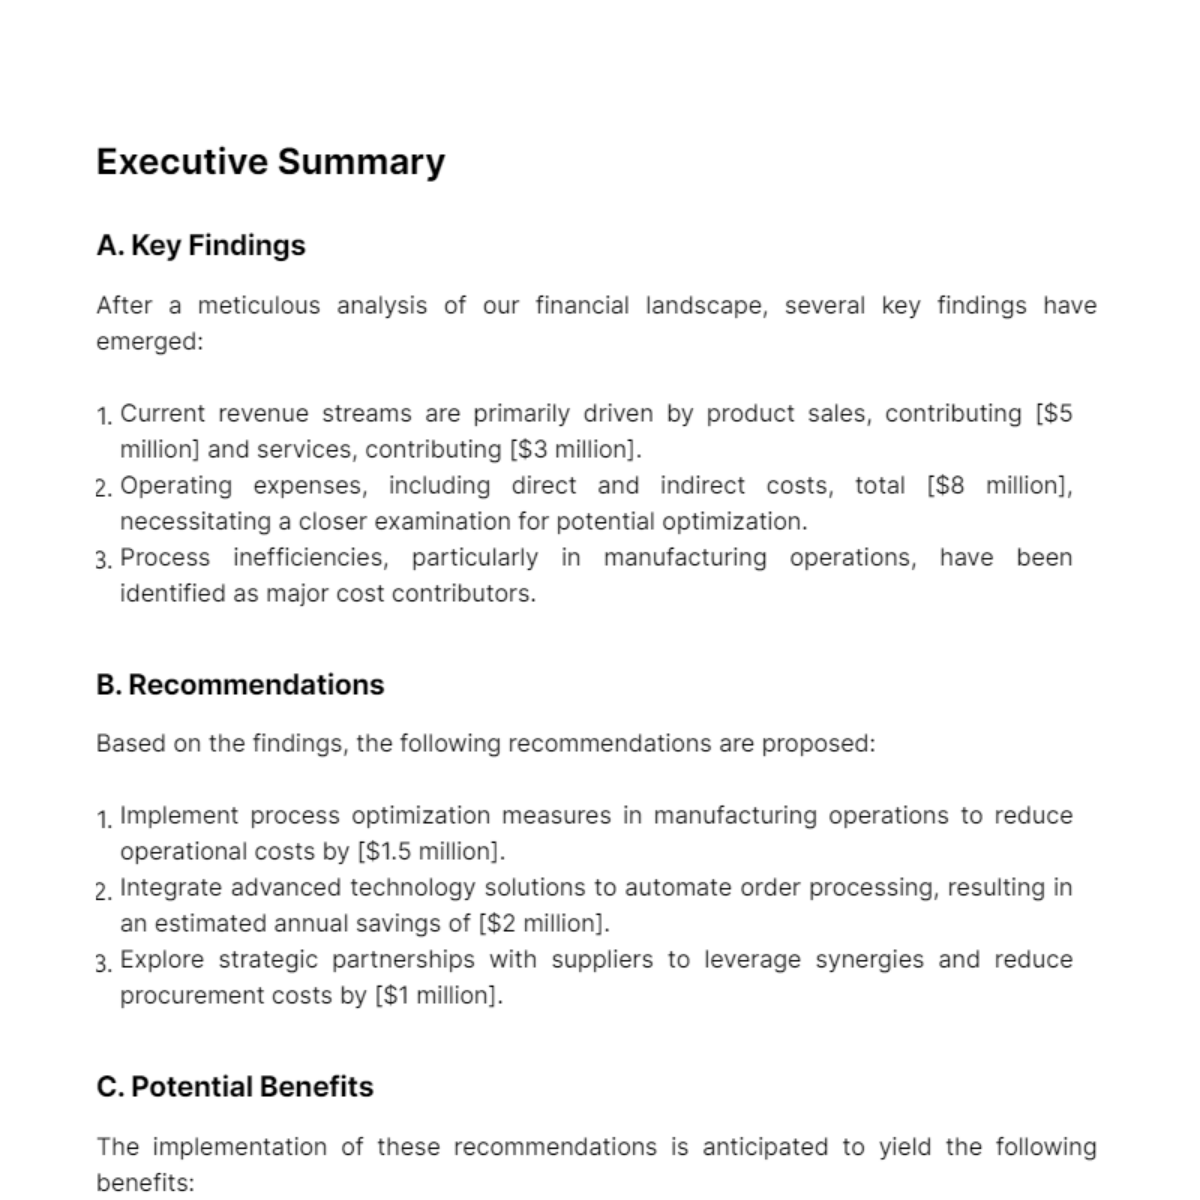 Financial Cost Efficiency Feasibility Study Template